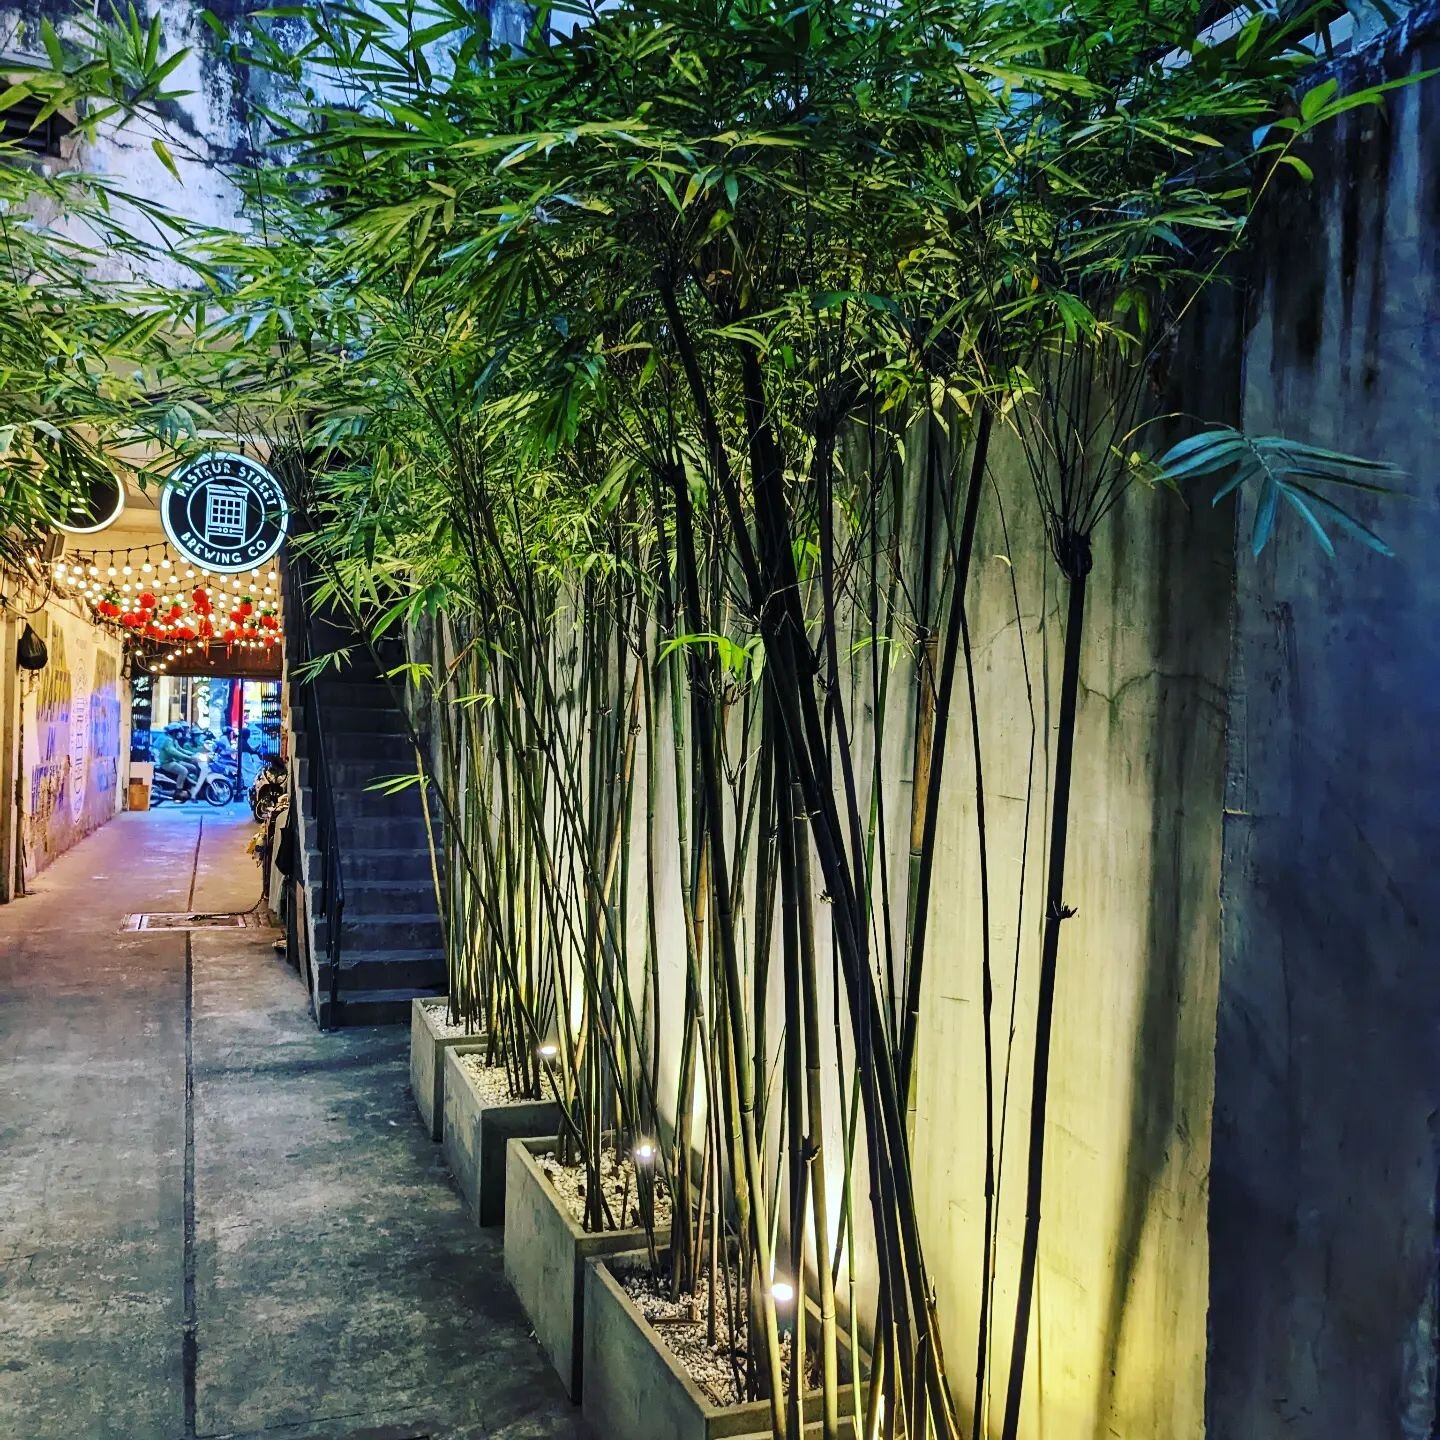 Stumbled over this bamboo in Ho Chi Minh City, near the Pasteur street brewery - Vietnam loves the bamboo! #ecofriendly #pasteurstreetbrewing #sustainability
#bamboo #bambooforthewin #sustainablefashion #hcm